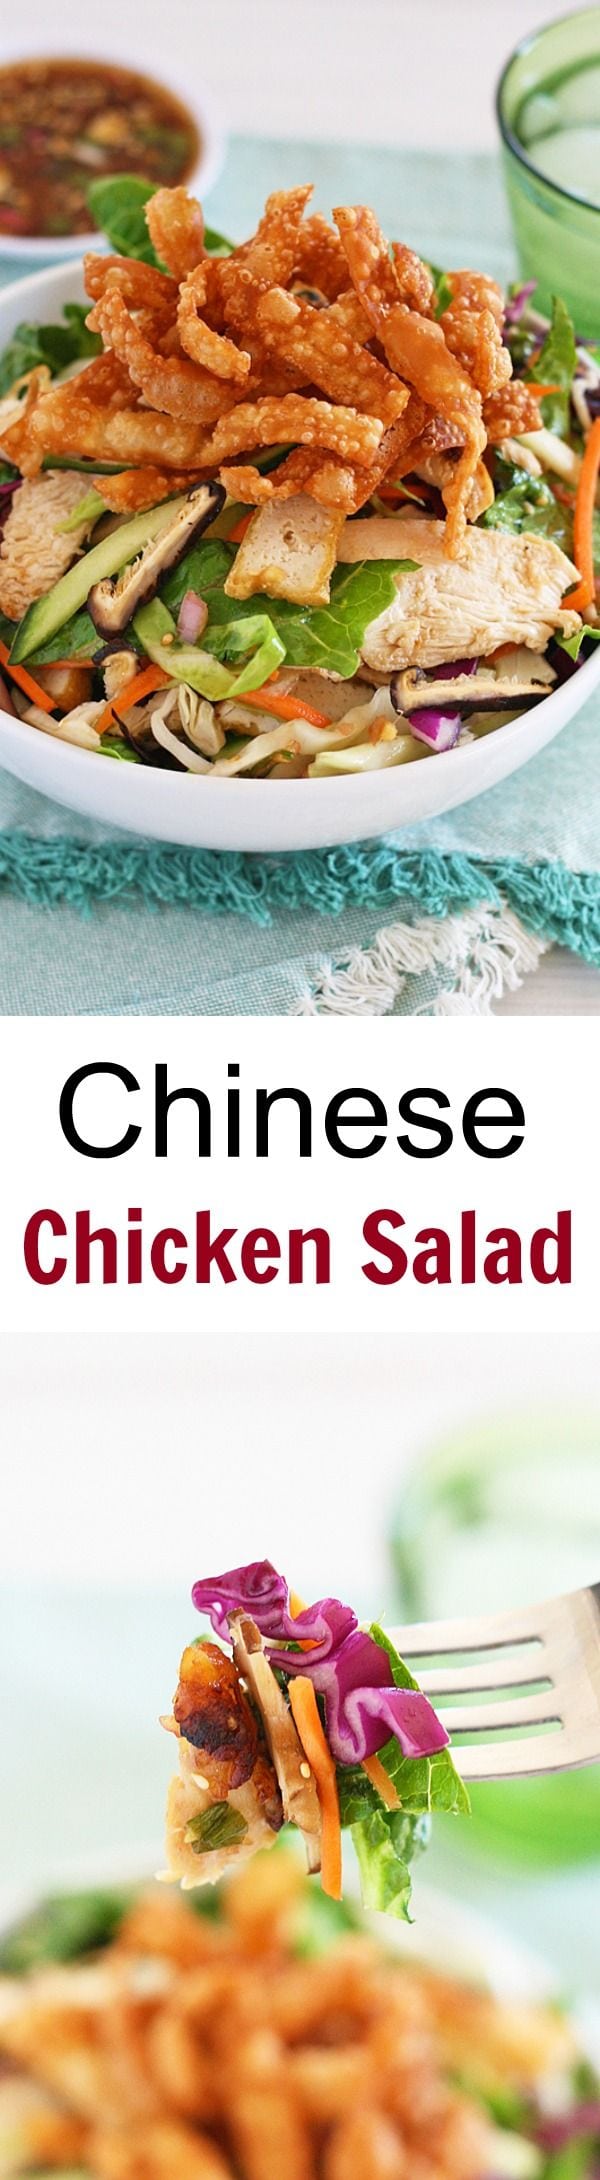 Chinese Chicken Salad - healthy salad with chicken breast and Chinese dressings. Homemade tastes better than restaurants & cheaper | rasamalaysia.com